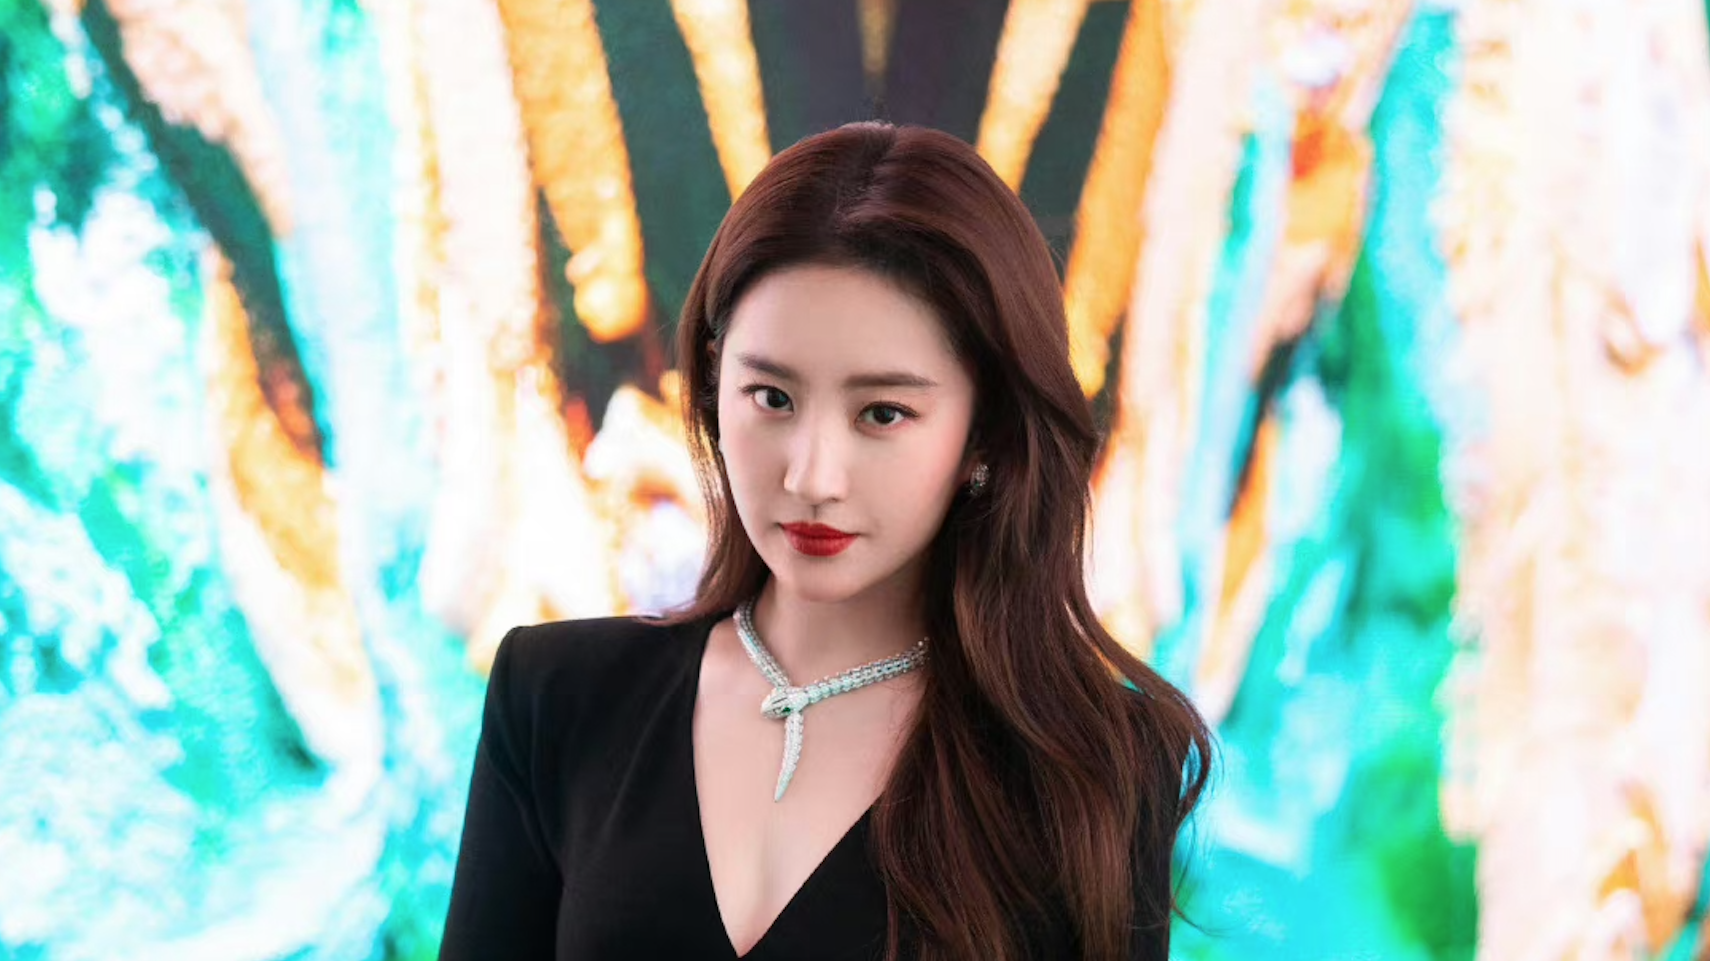 Luxury brands are appointing Chinese celebrities as ambassadors en masse. Jing Daily offers a playbook for brands to pick the right faces and navigate celebrity scandals. Image: Bvlgari